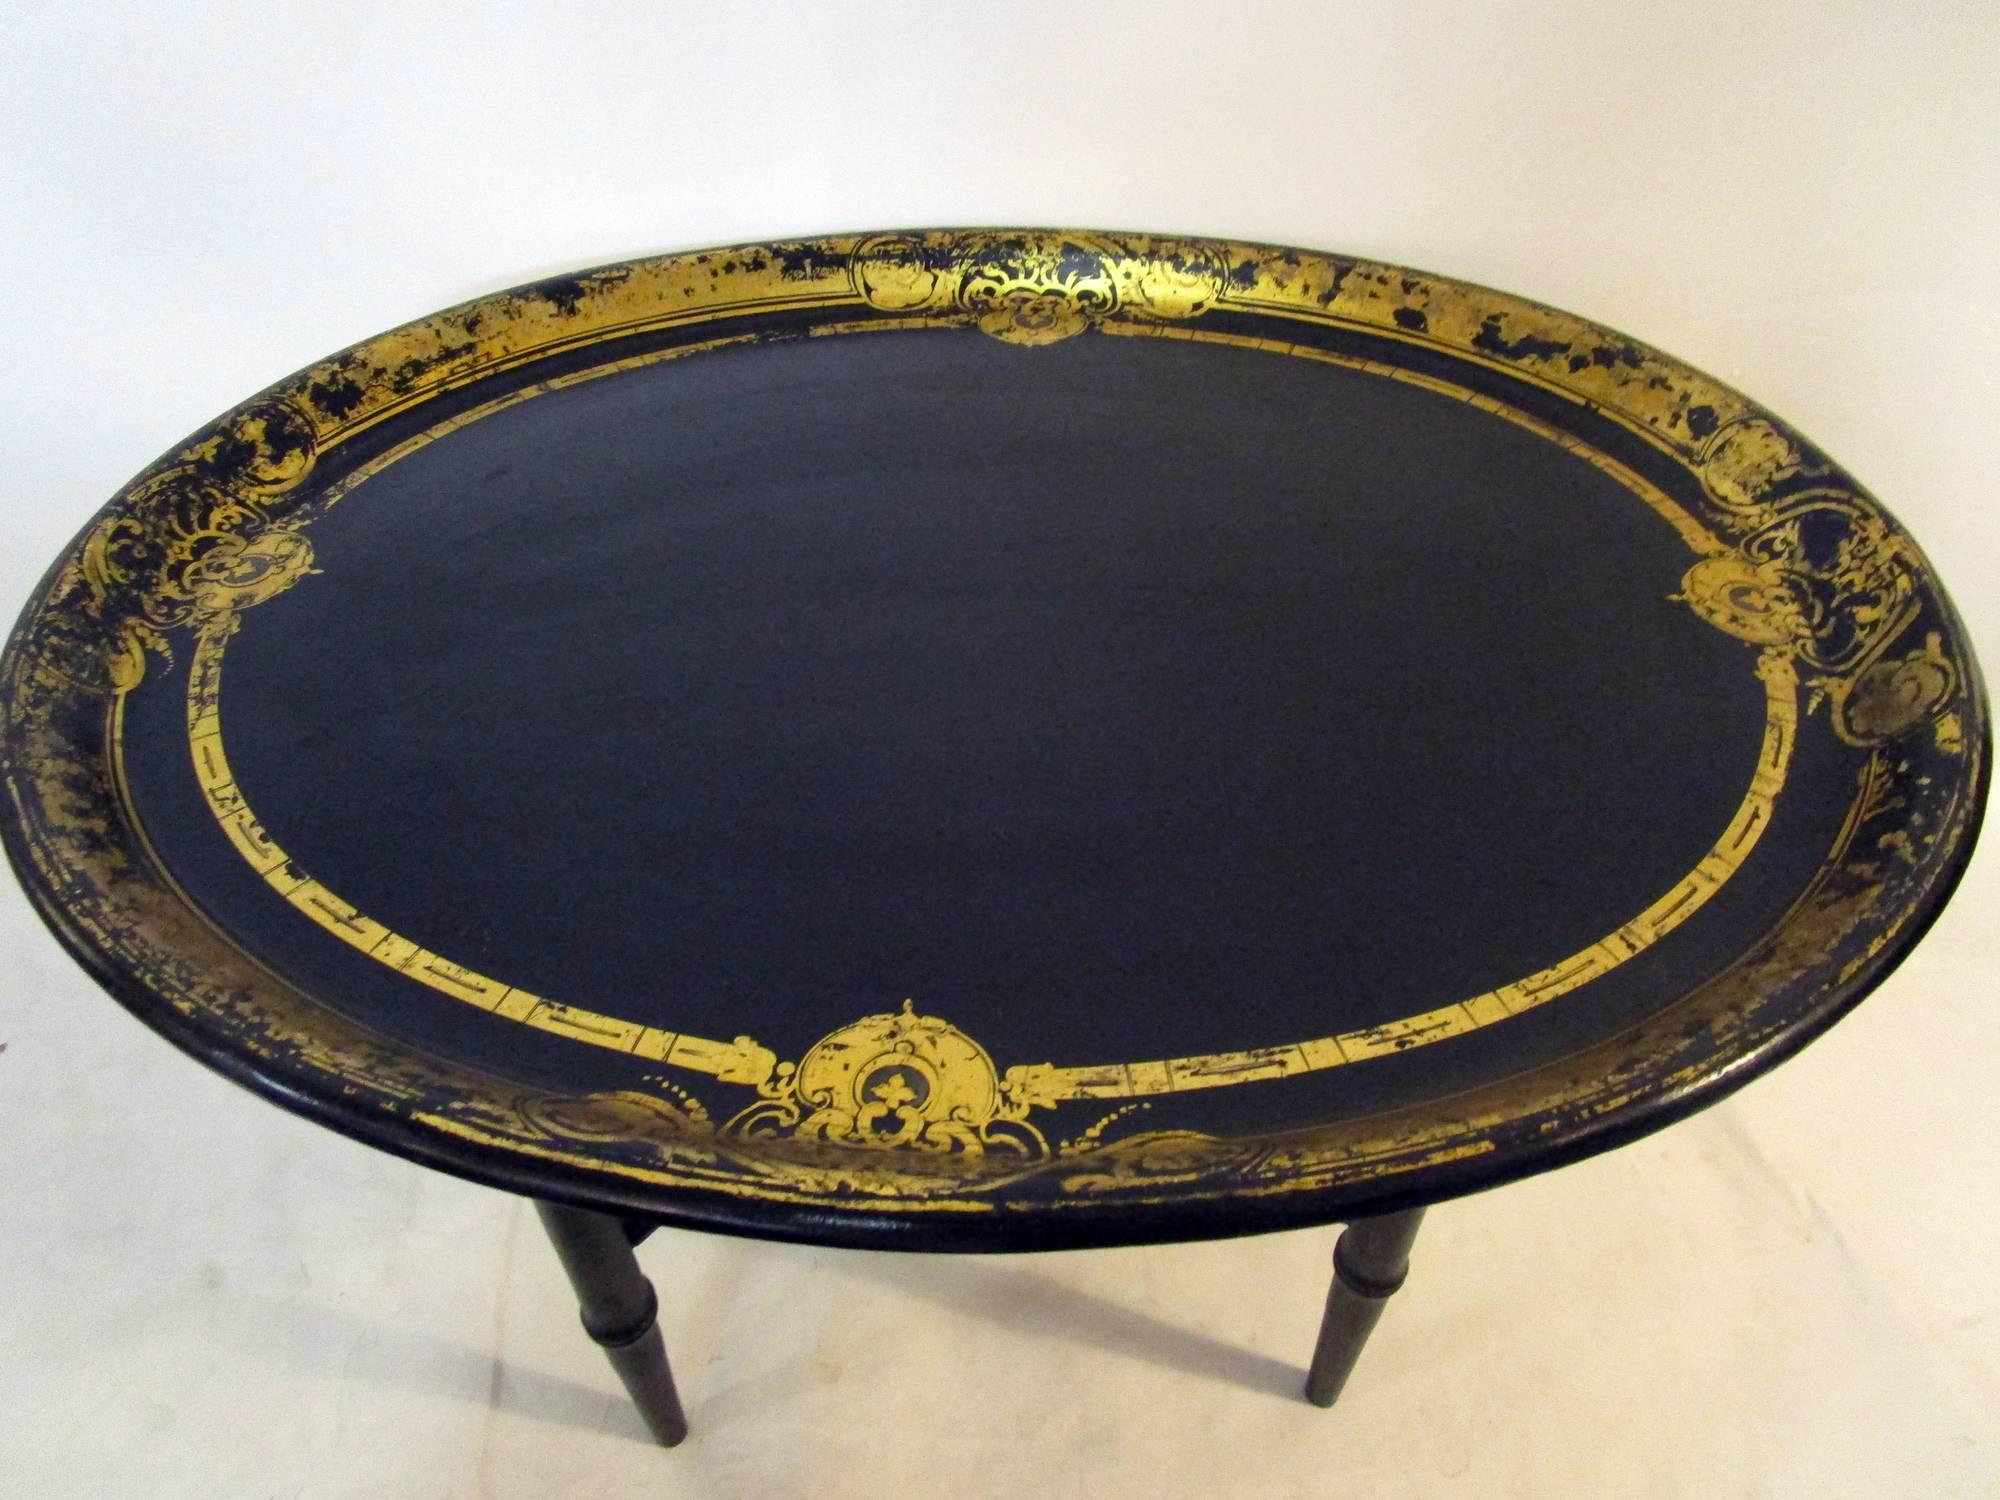 Oval shaped papier mâché tray table featuring a delicate design of gold leaf scroll work border. The sturdy adjustable wooden Chinoiserie style wooden stand is not antique but has been constructed to accommodate the English tray. The light fading to